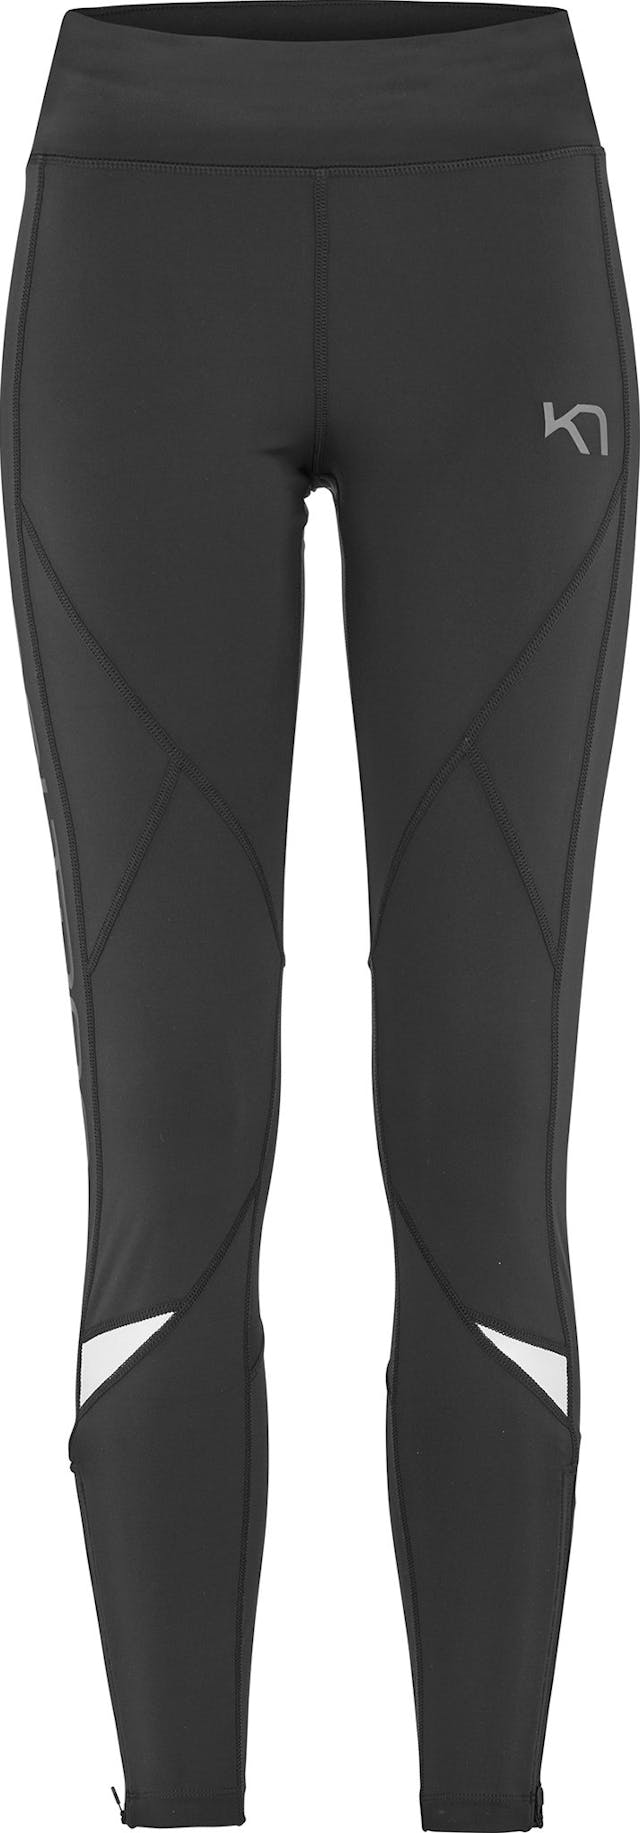 Product image for Louise 2.0 Tights - Women's